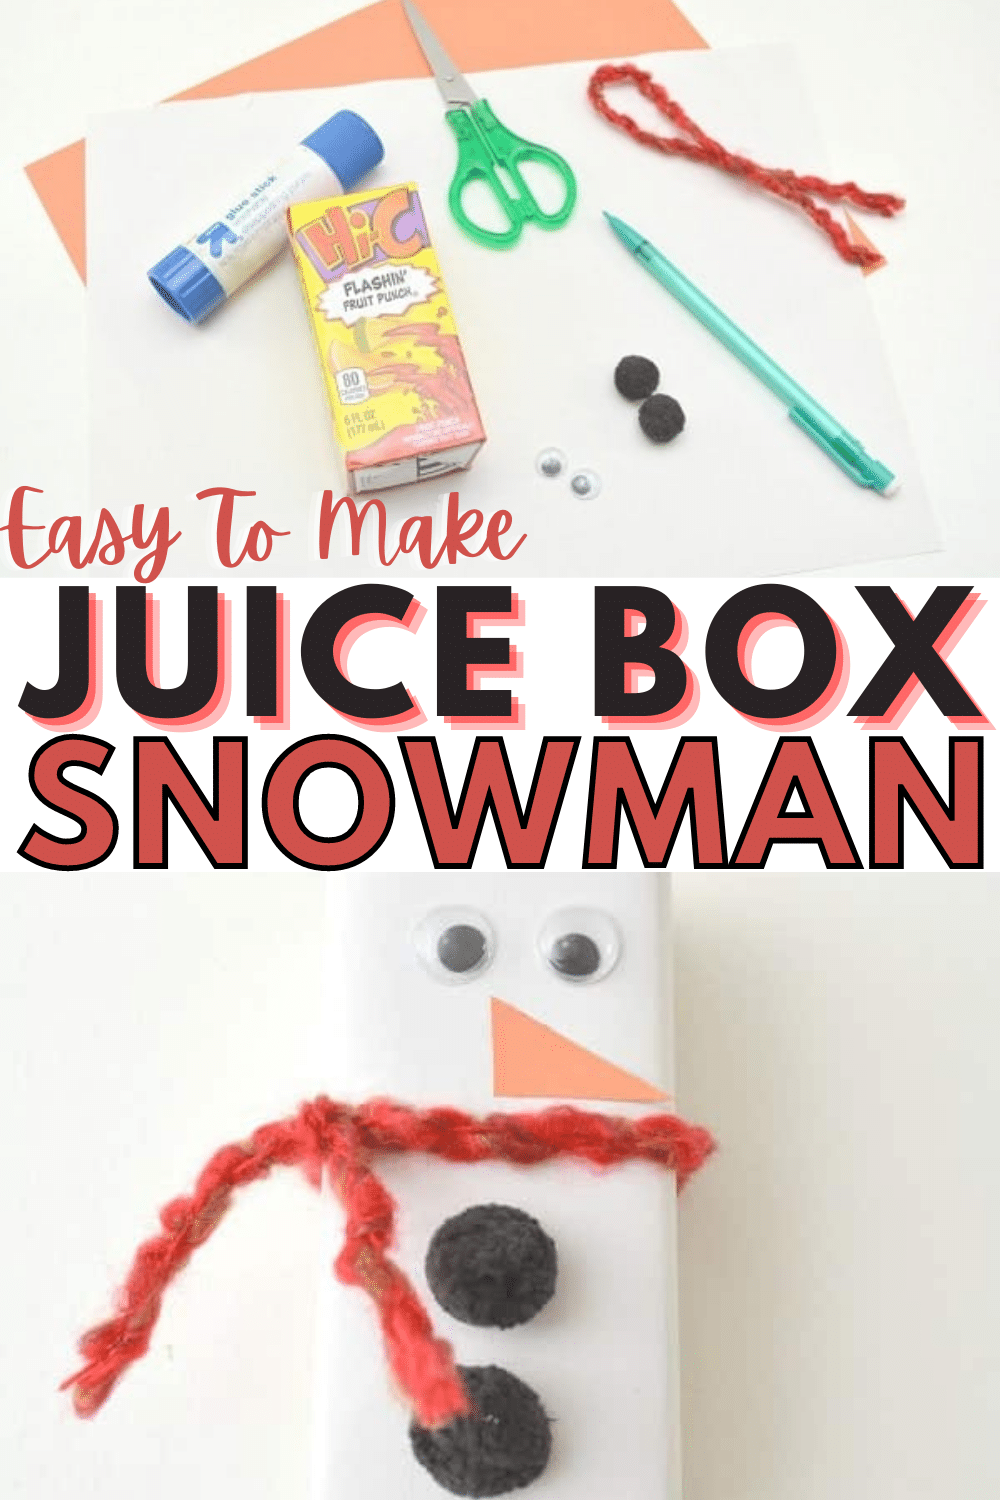 A few simple craft supplies and a juice box is all it takes to make this Juice Box Snowman that will delight your child. It's fast and easy to make too! #forkids #snowman #craft #diy via @wondermomwannab